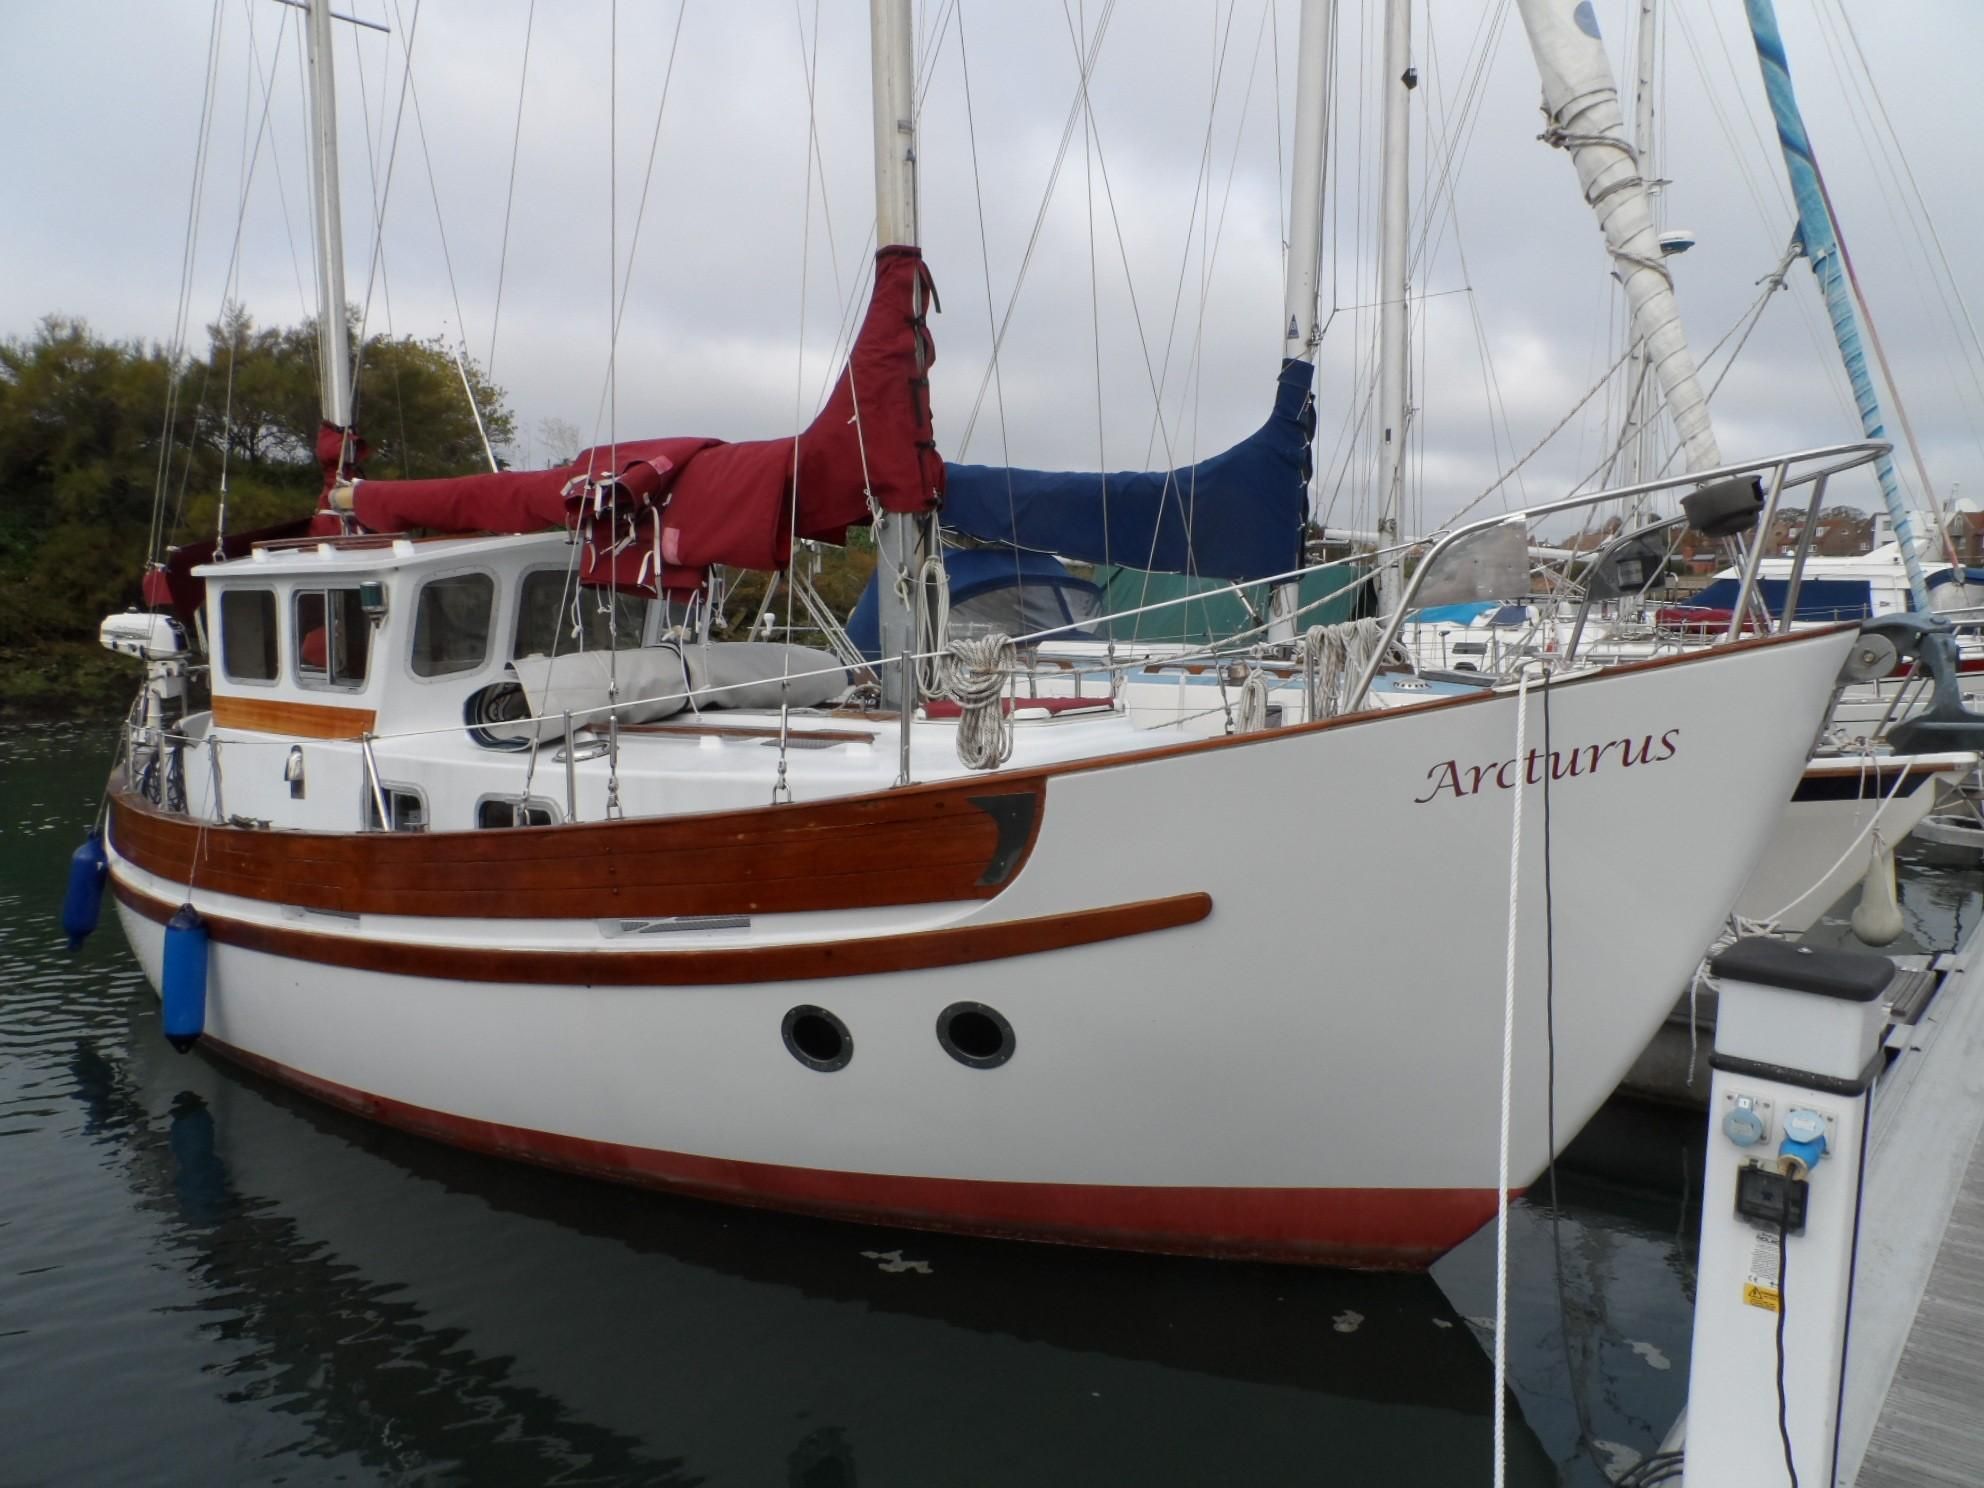 fisher yachts for sale uk